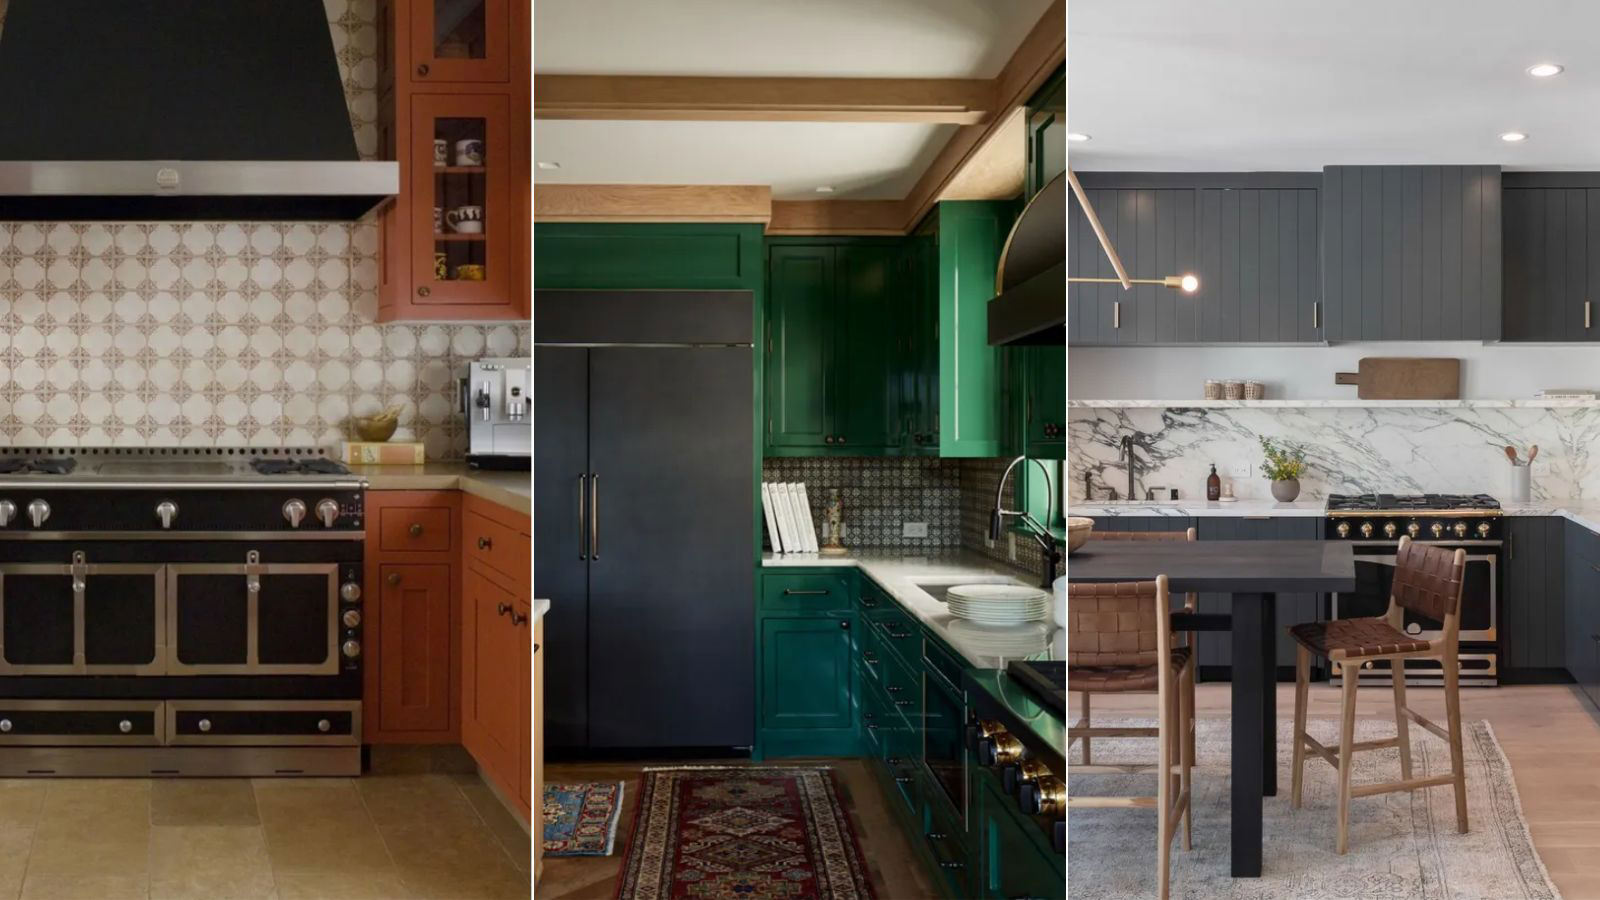 What colors go best in kitchens with black appliances? 6 schemes to ...